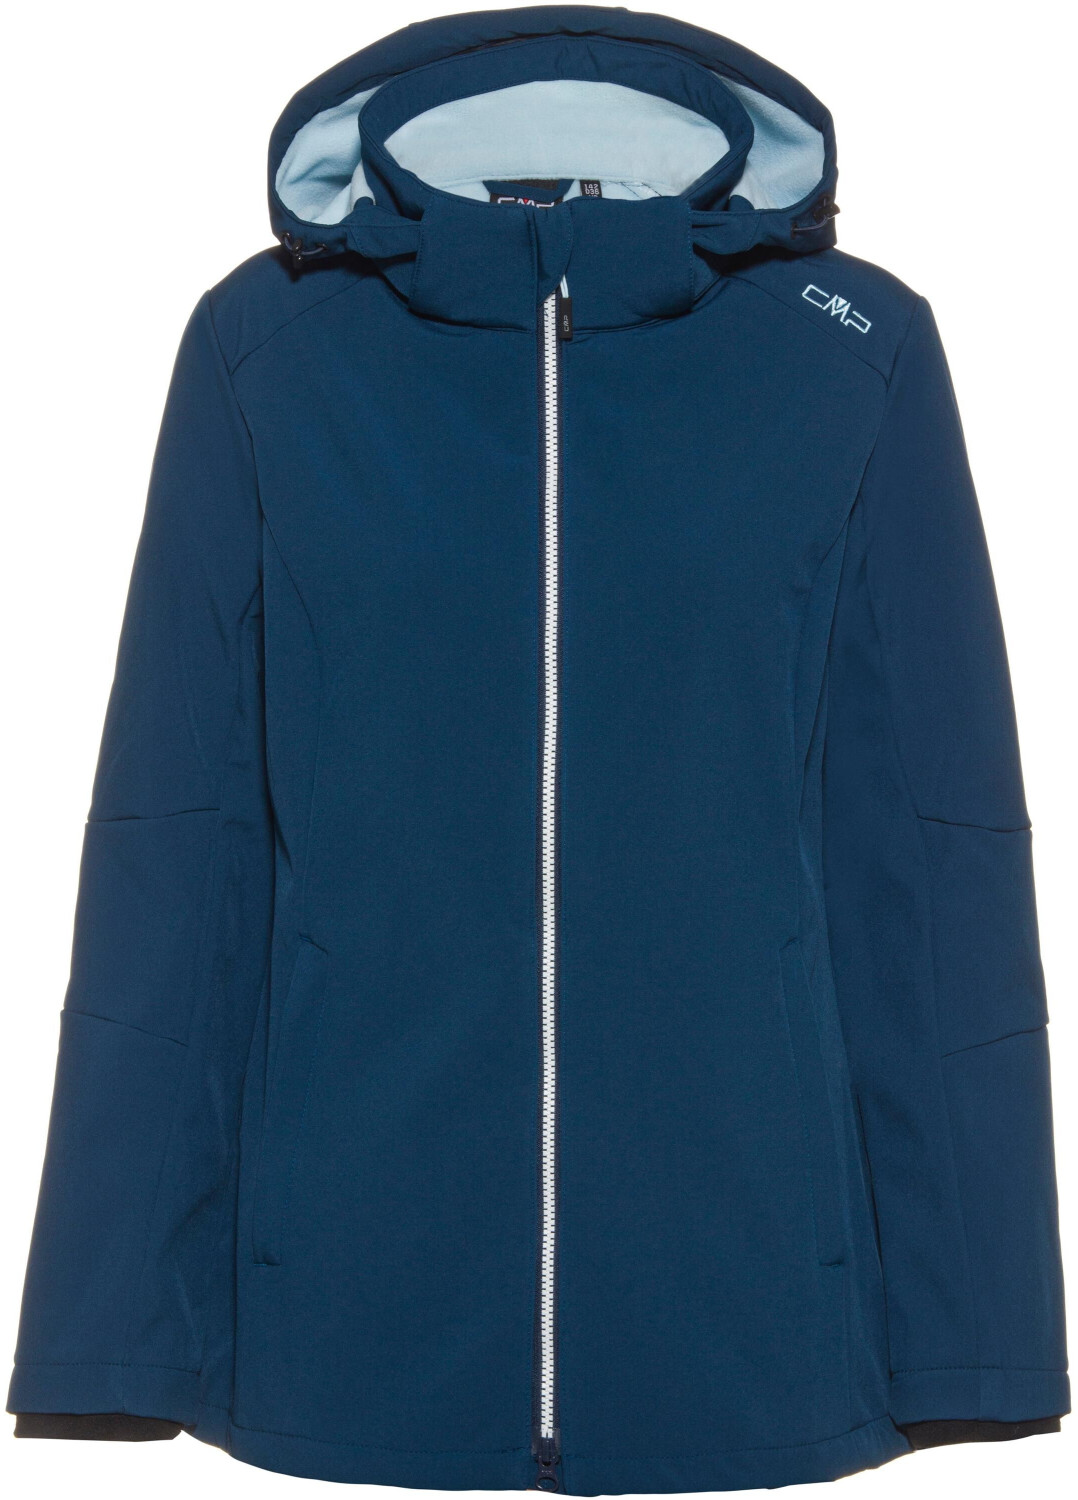 (3A22226) Woman bei Fit blue 39,99 Preisvergleich Jacket Softshell With € Long blue Comfortable | CMP ink/cristal ab